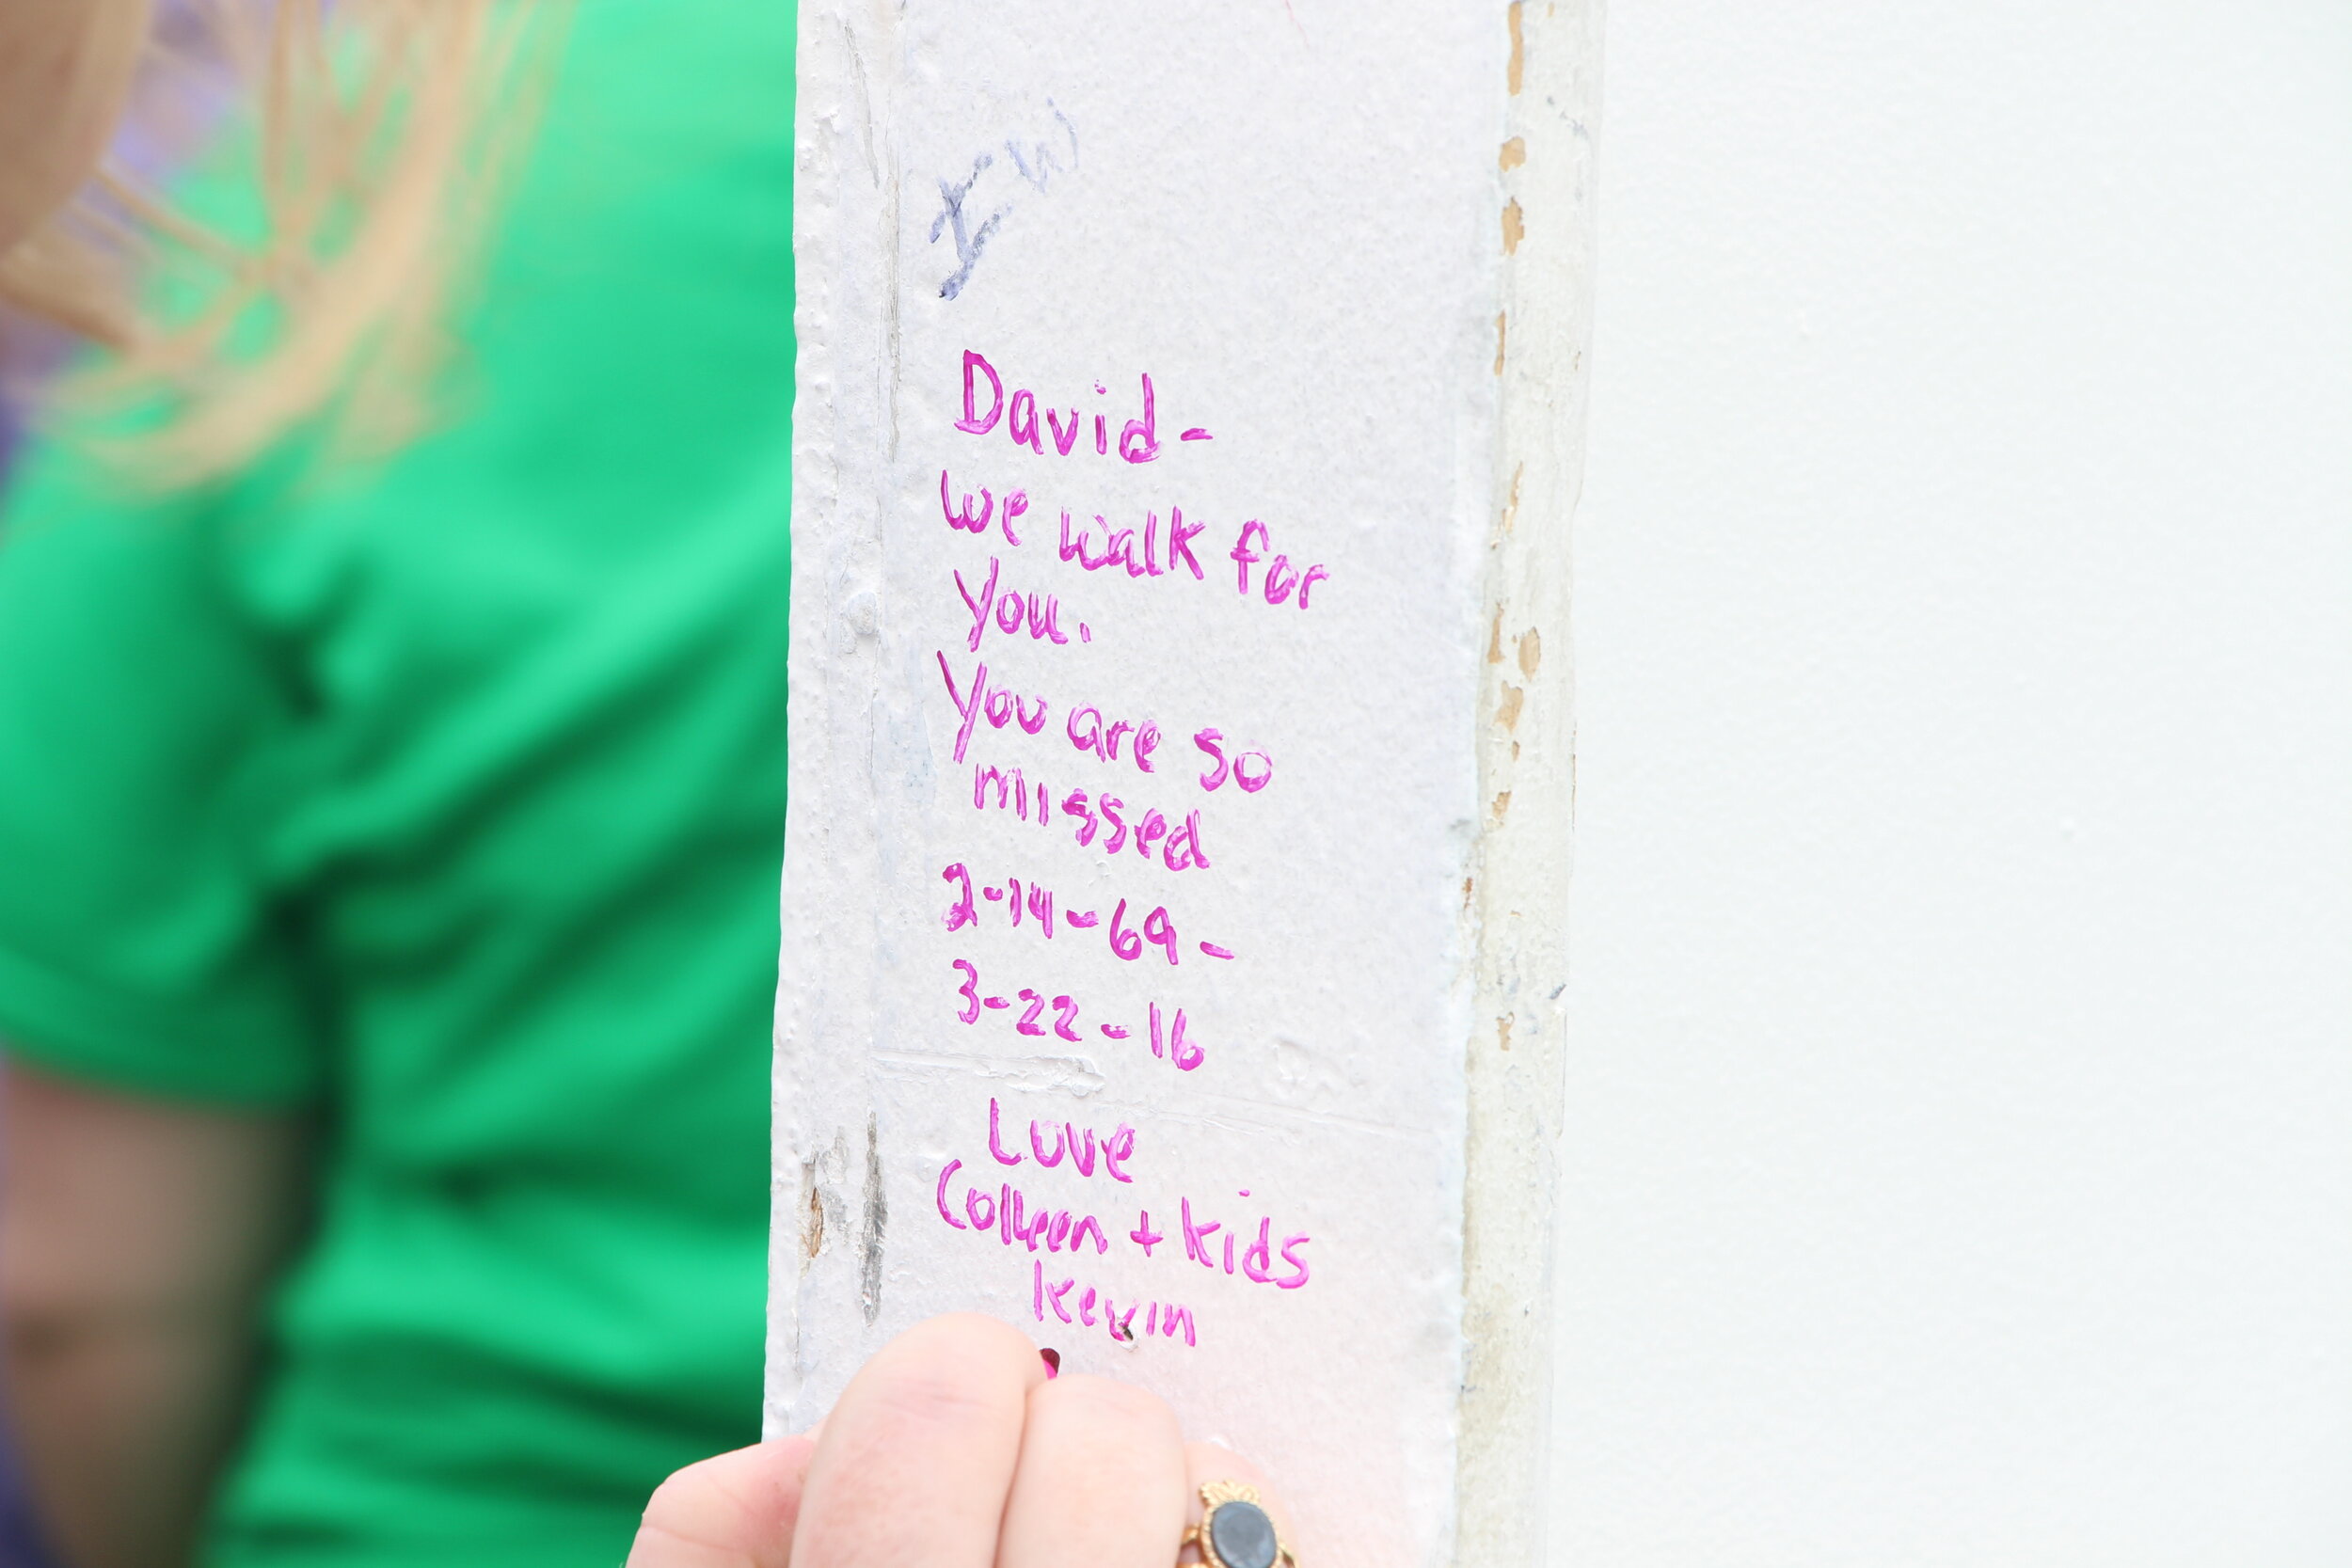 A close-up of a personal message on the Why I Walk Wall.